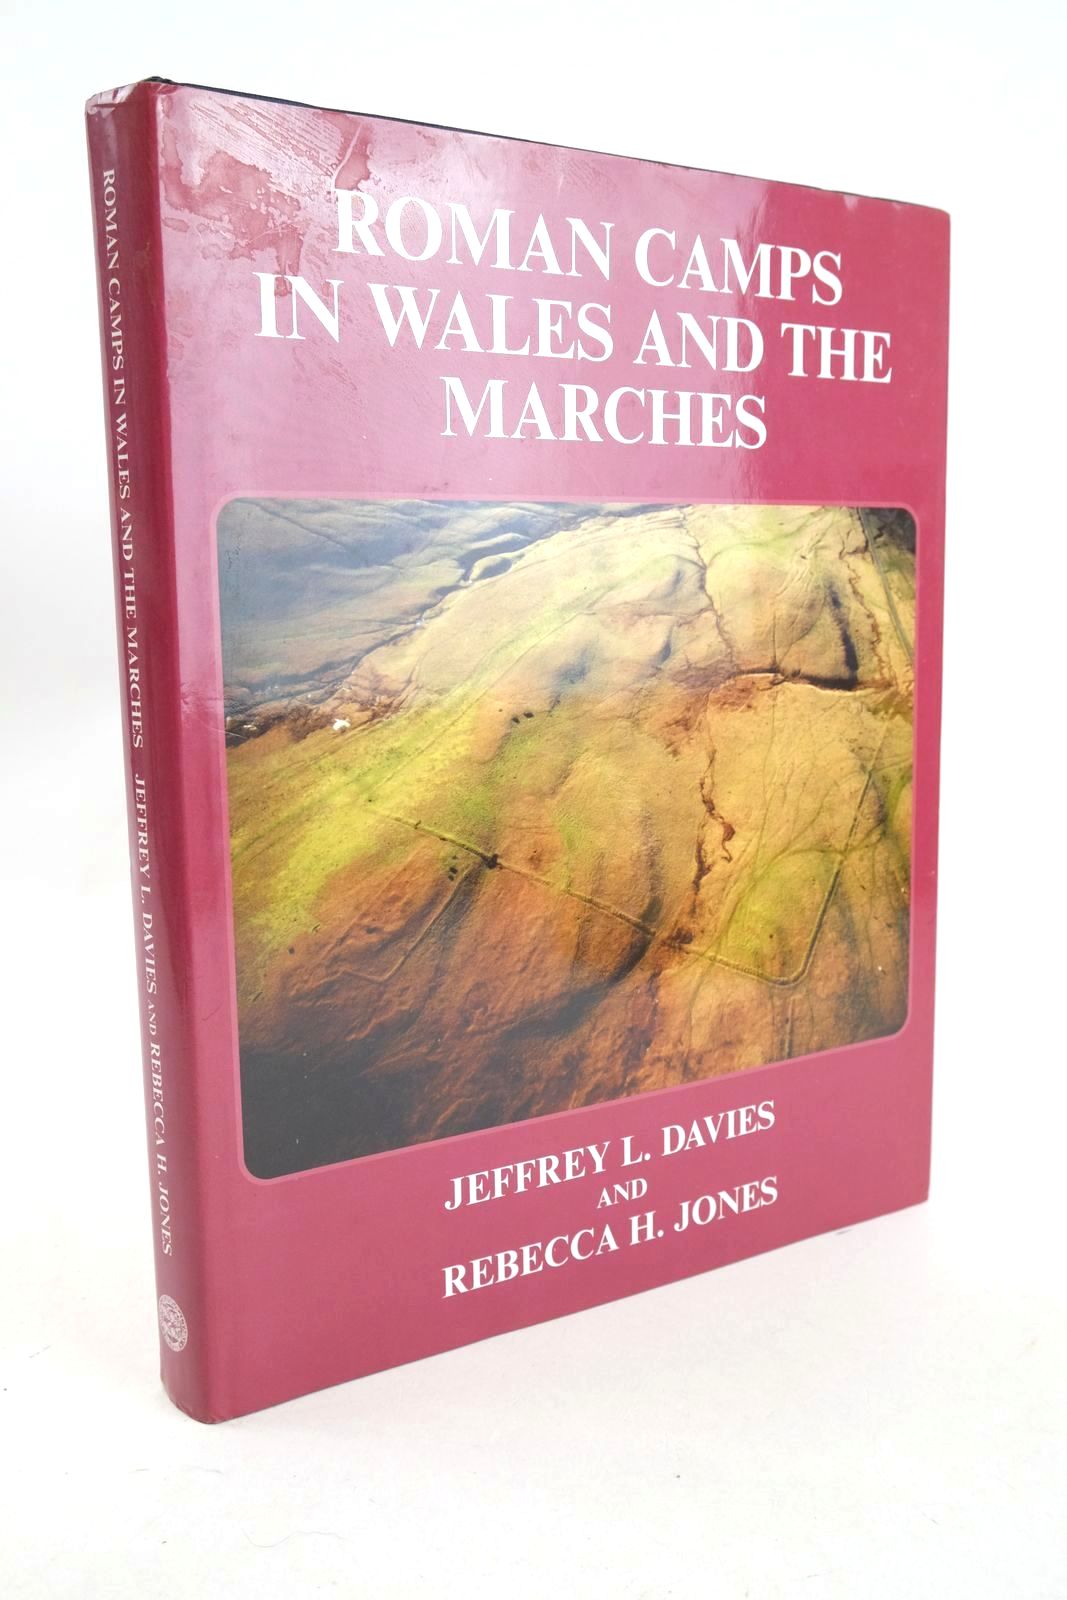 Photo of ROMAN CAMPS IN WALES AND THE MARCHES written by Davies, Jeffery L. Jones, Rebecca H. published by University Of Wales Press (STOCK CODE: 1327213)  for sale by Stella & Rose's Books